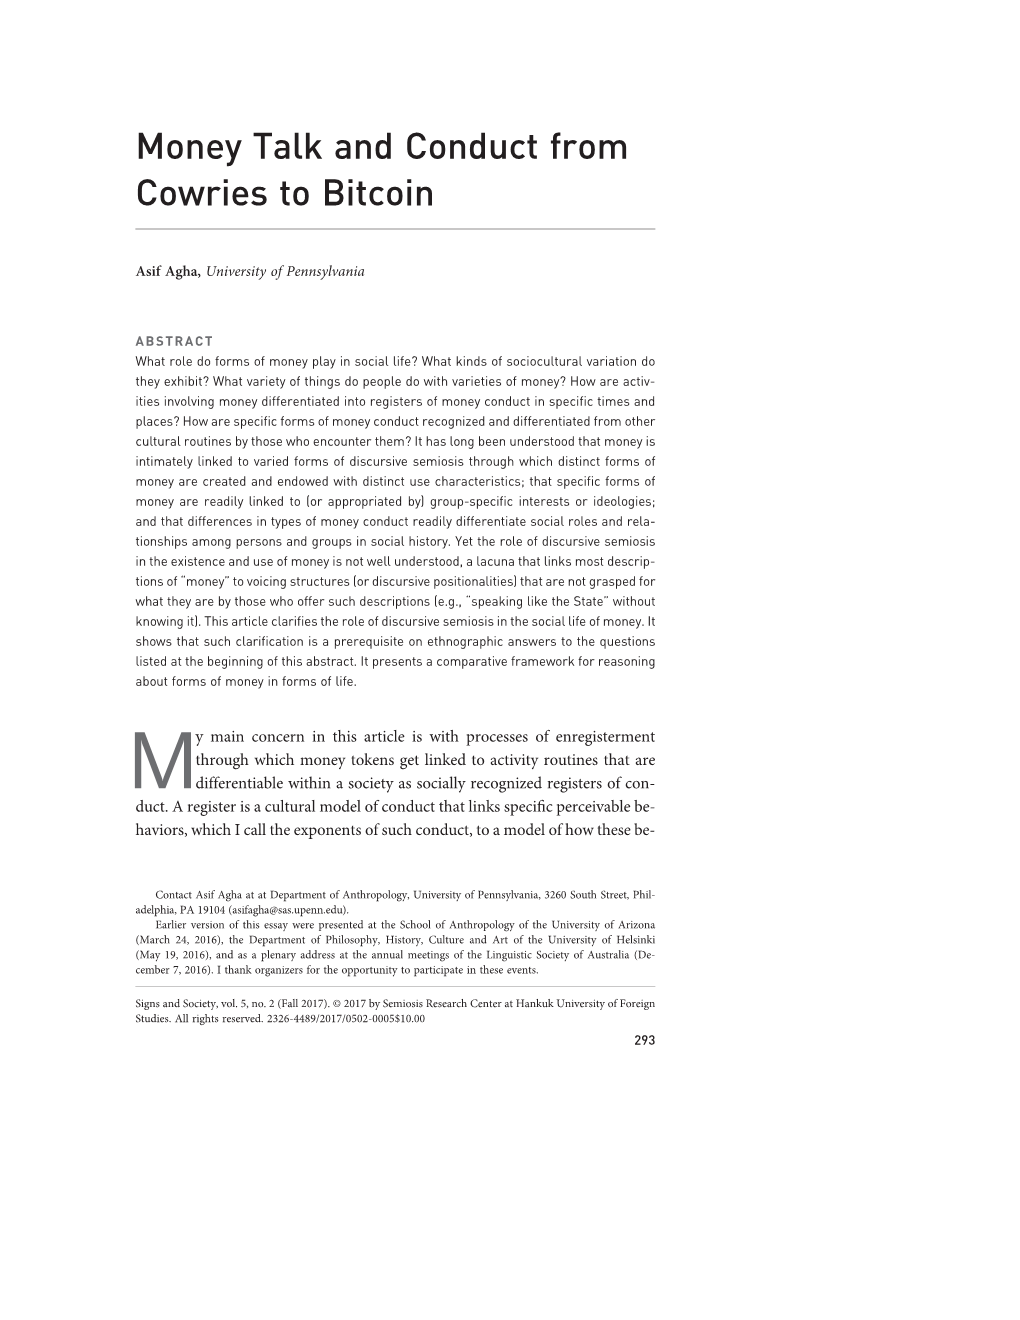 Money Talk and Conduct from Cowries to Bitcoin